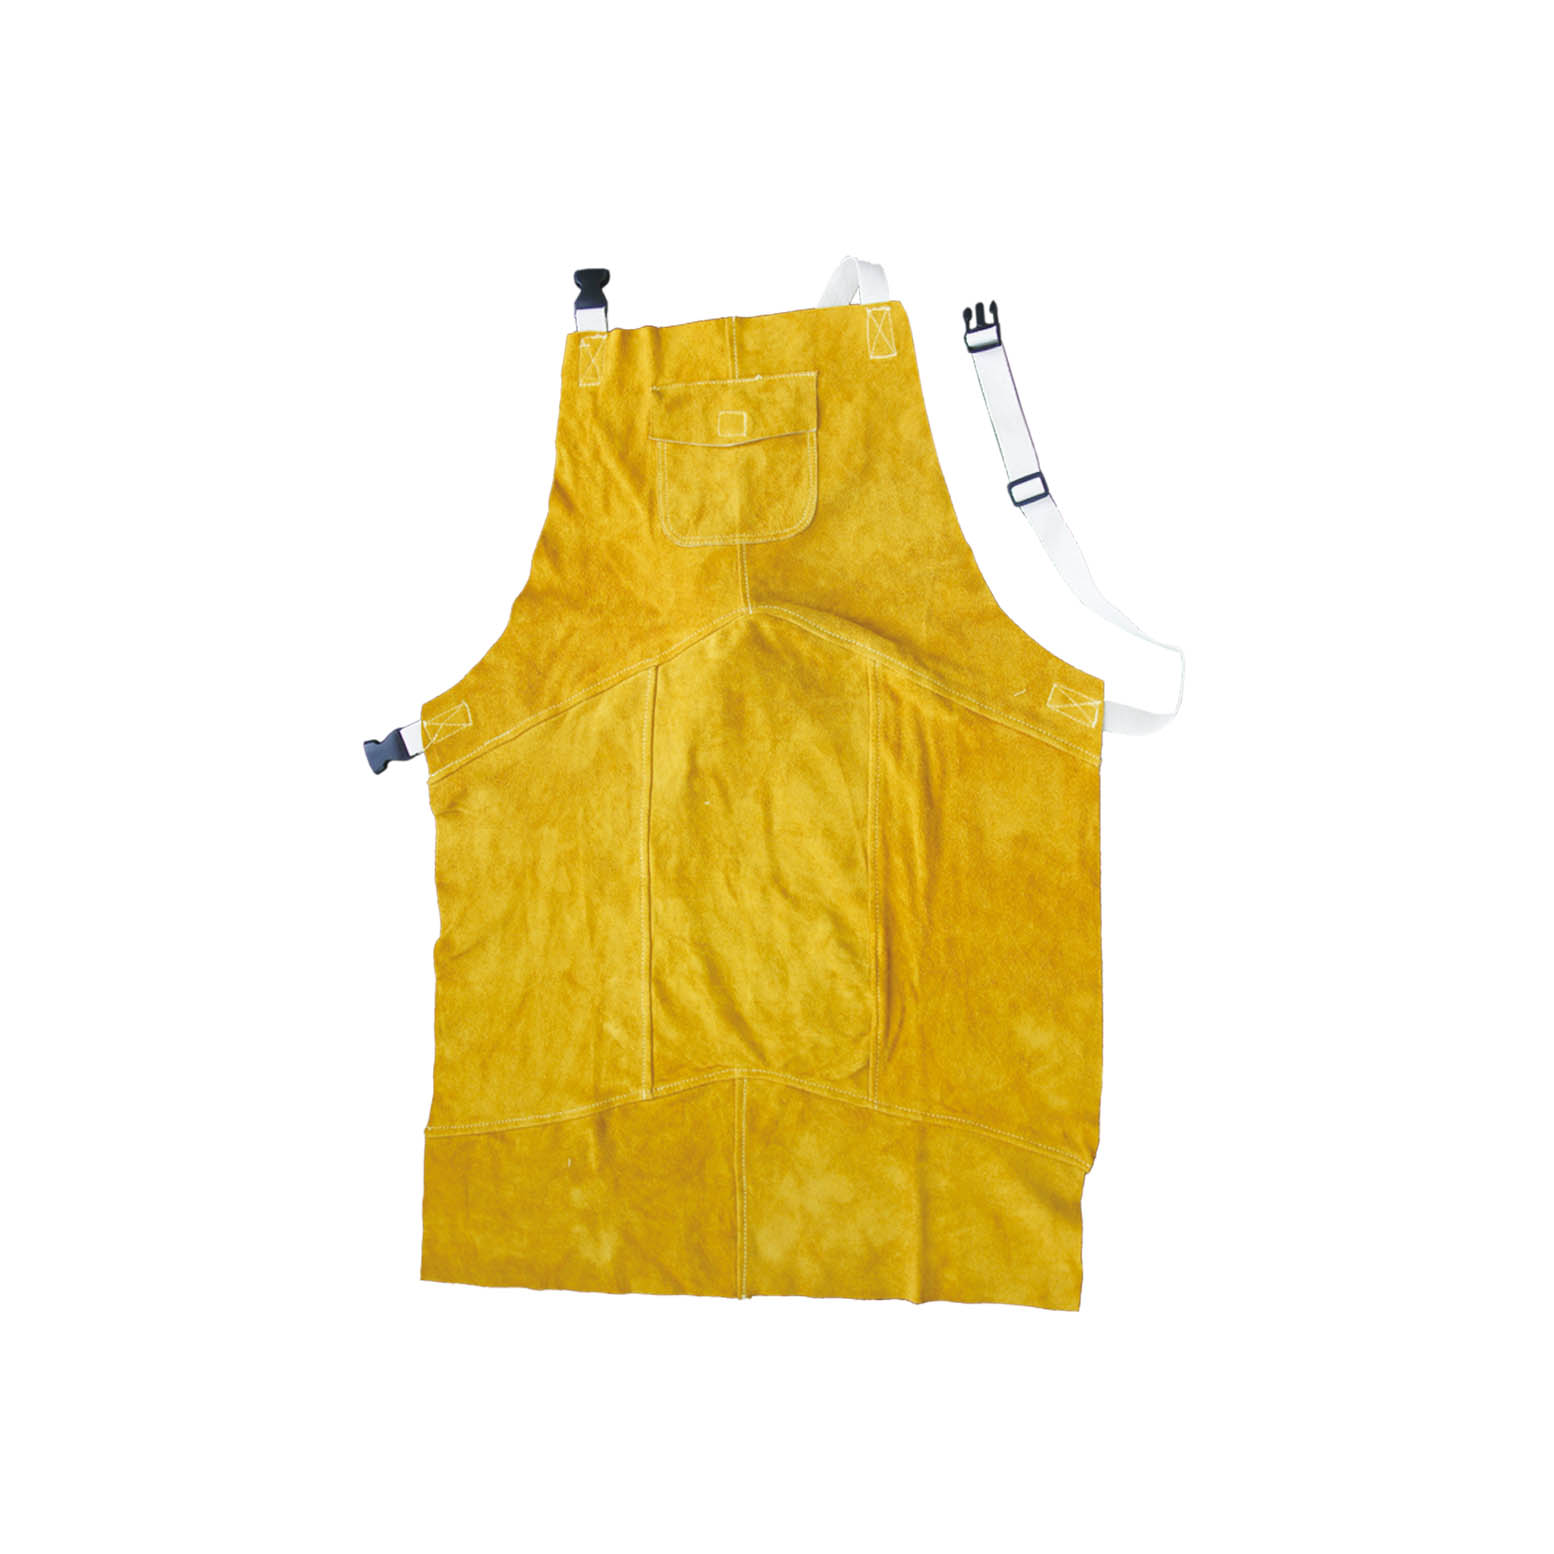 welding safety aprons